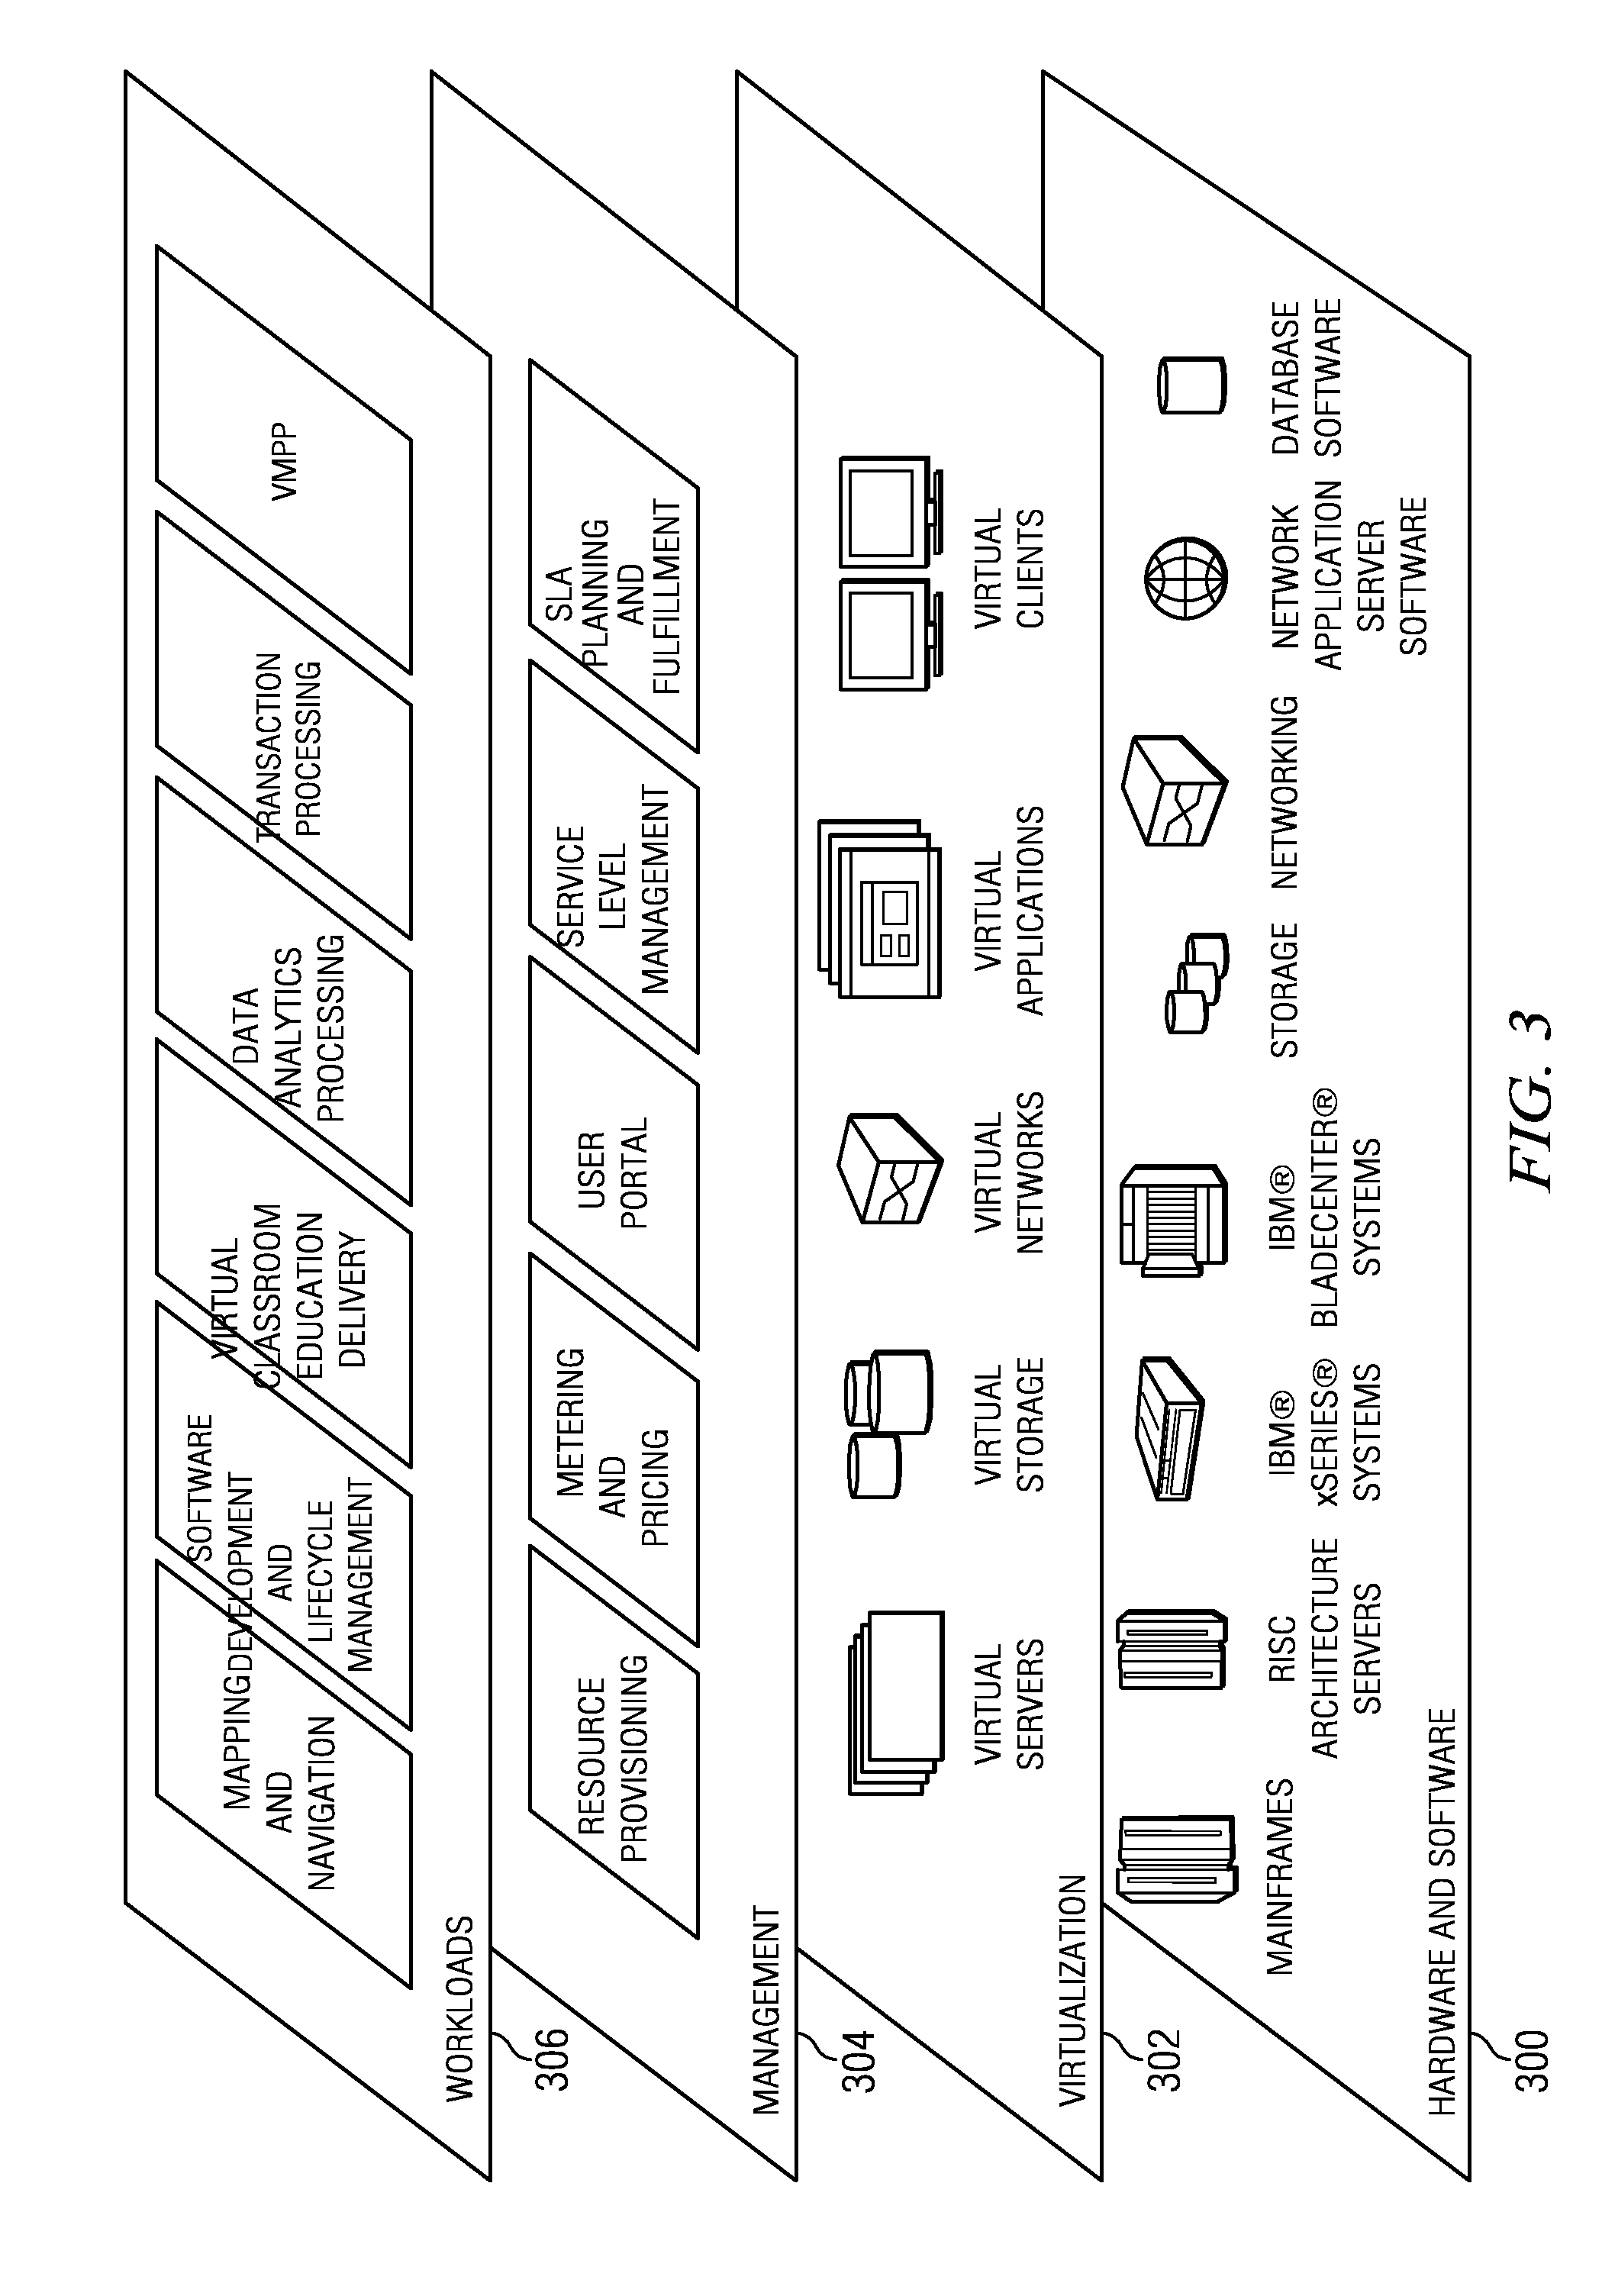 Automated virtual machine placement planning using different placement solutions at different hierarchical tree levels